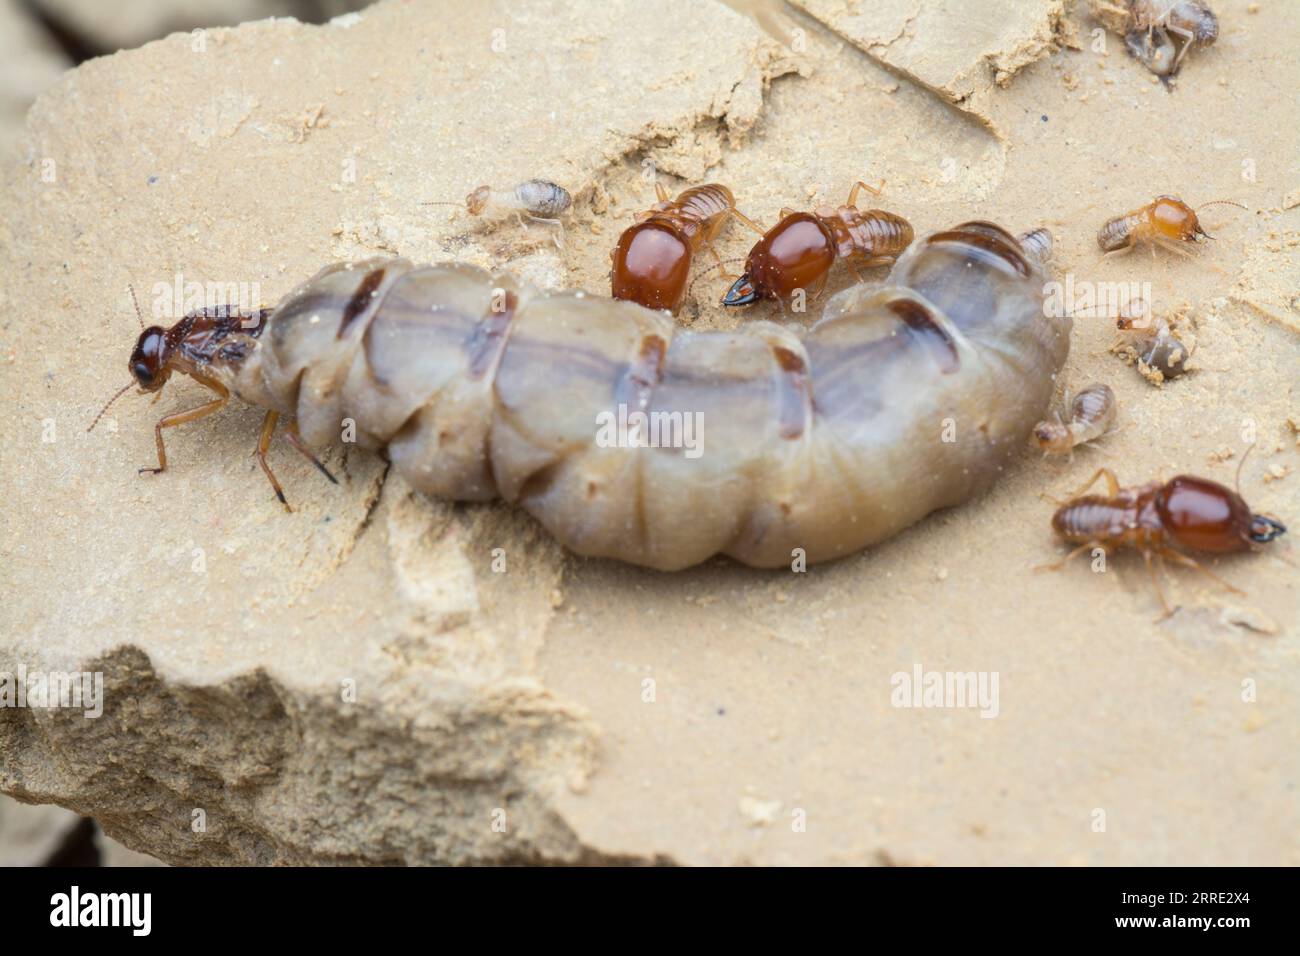 Scene and types of termites found in the mound hill. Stock Photo